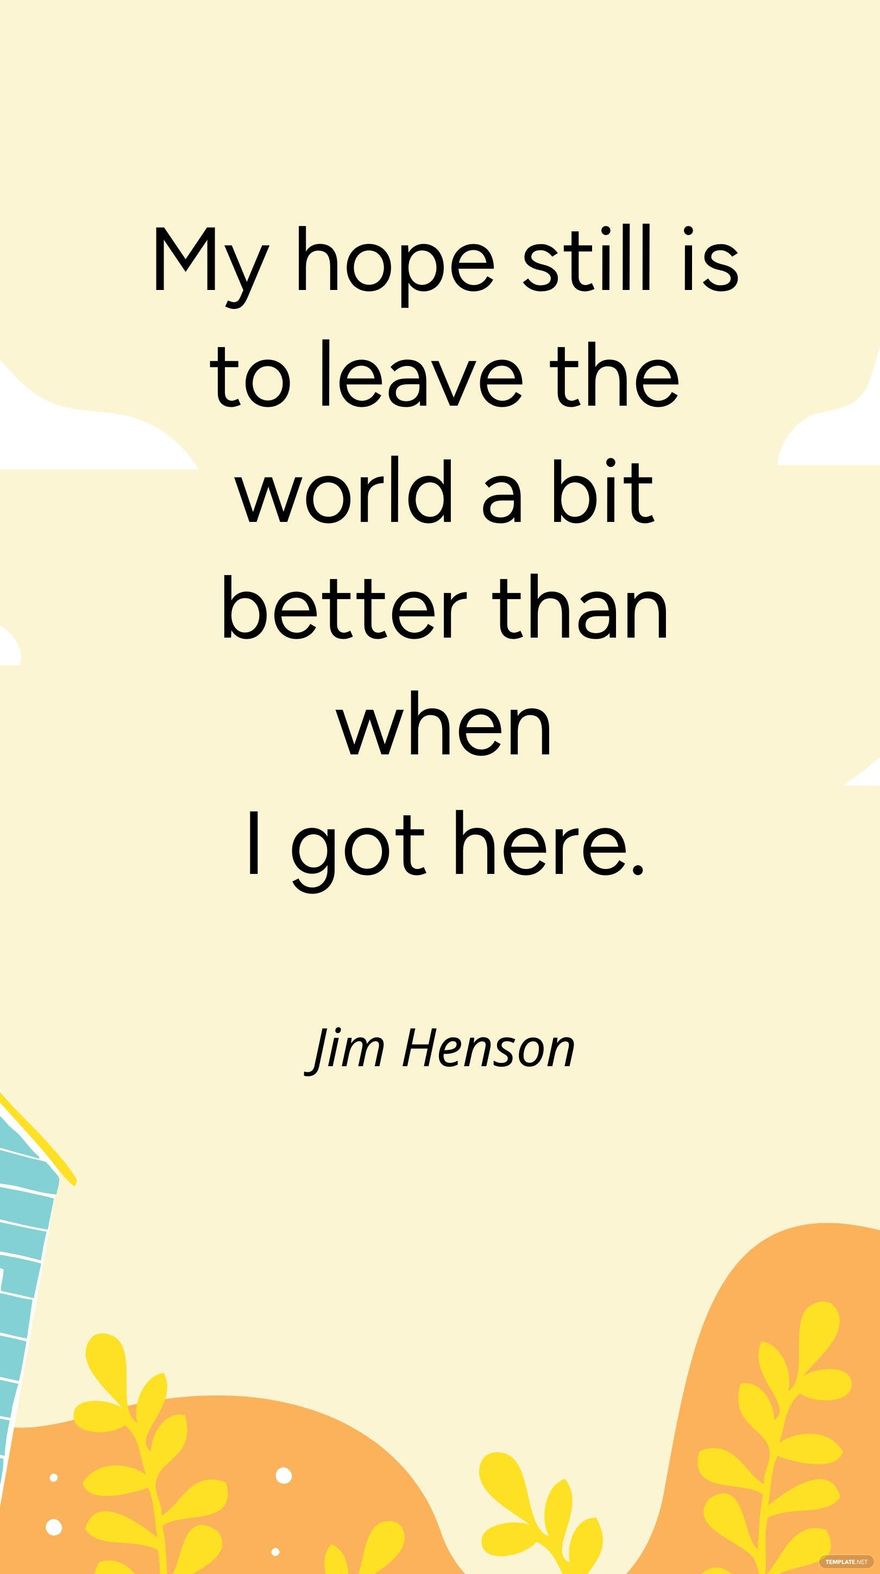 Jim Henson - My hope still is to leave the world a bit better than when I got here.